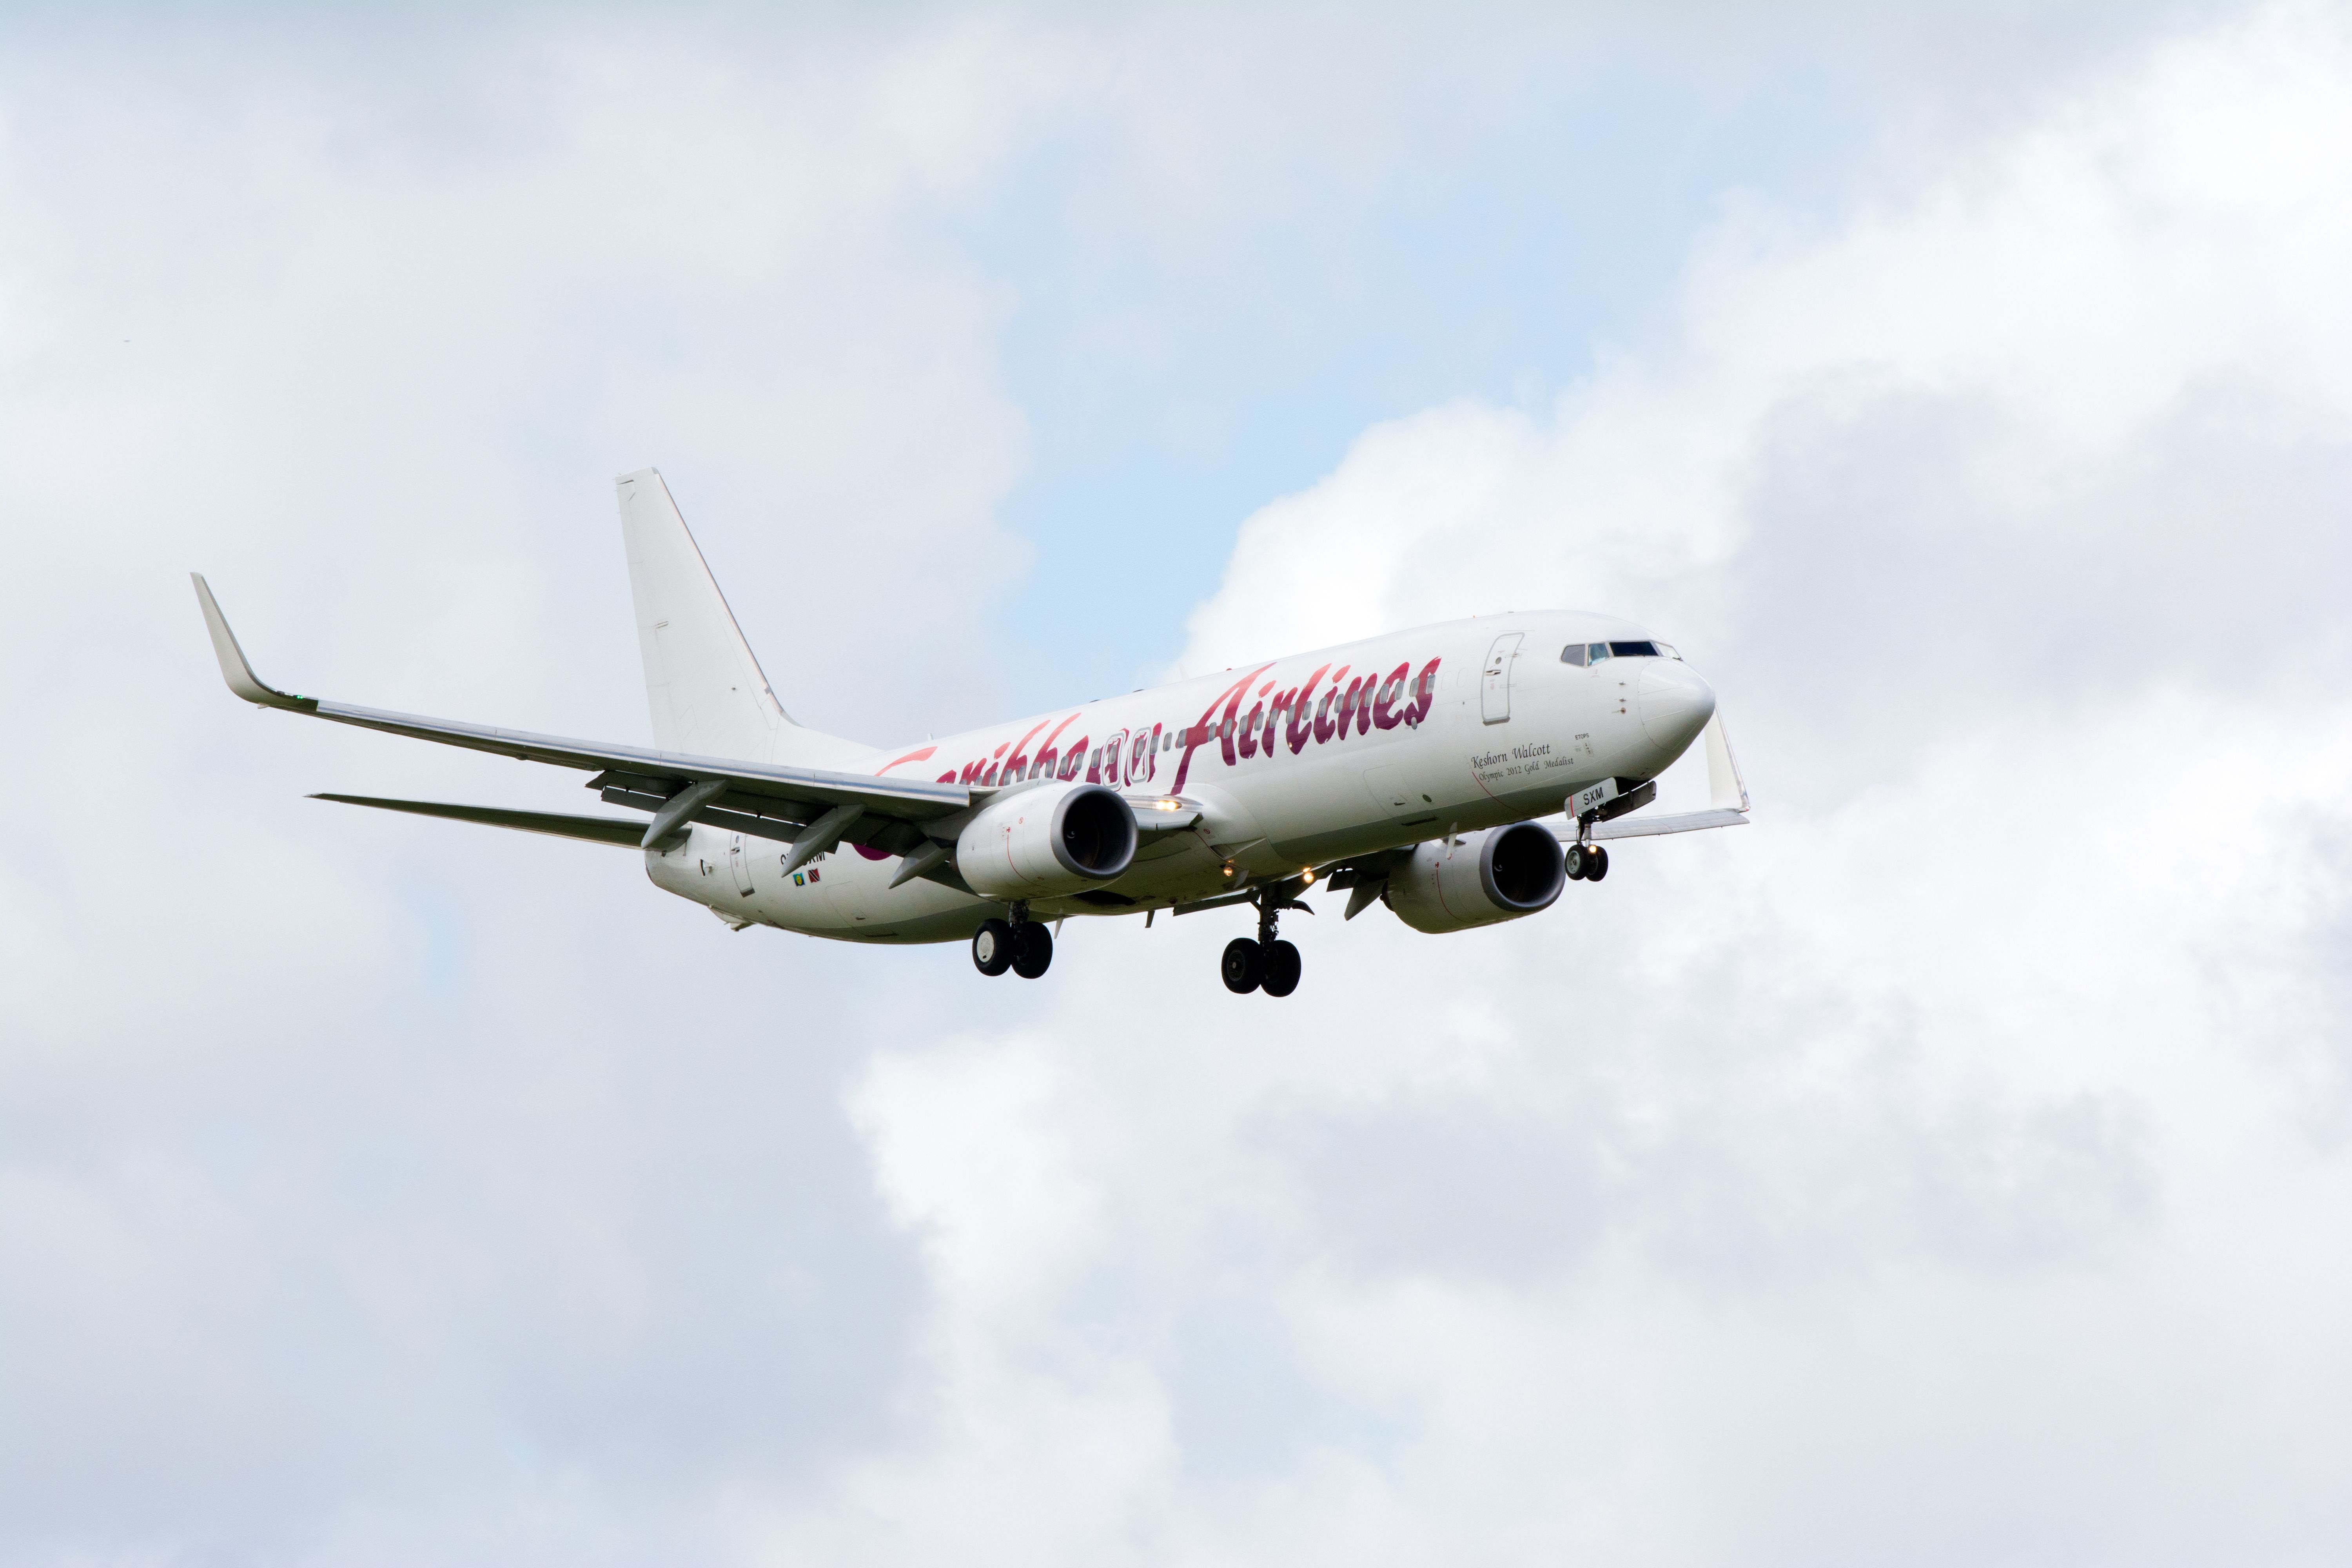 A Caribbean Airlines Boeing 737 flying in the sky.